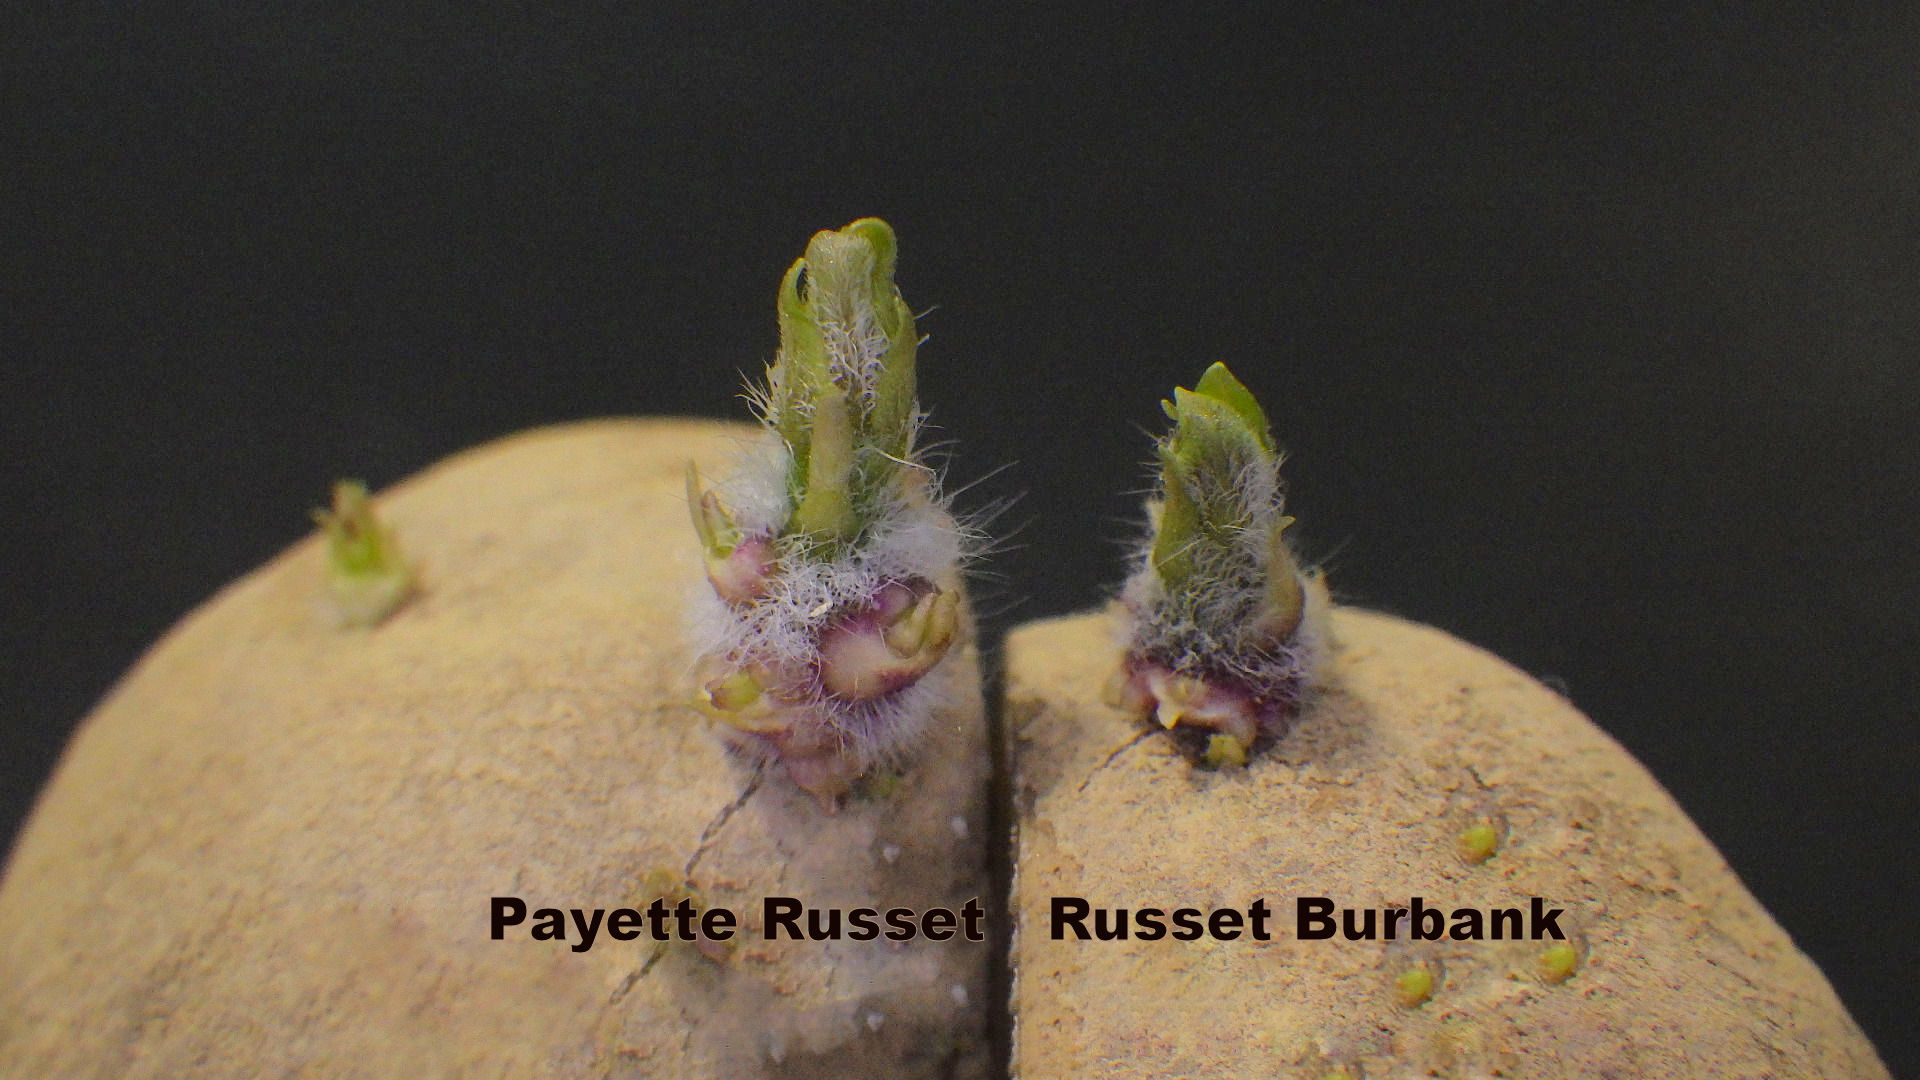 Payette Russet